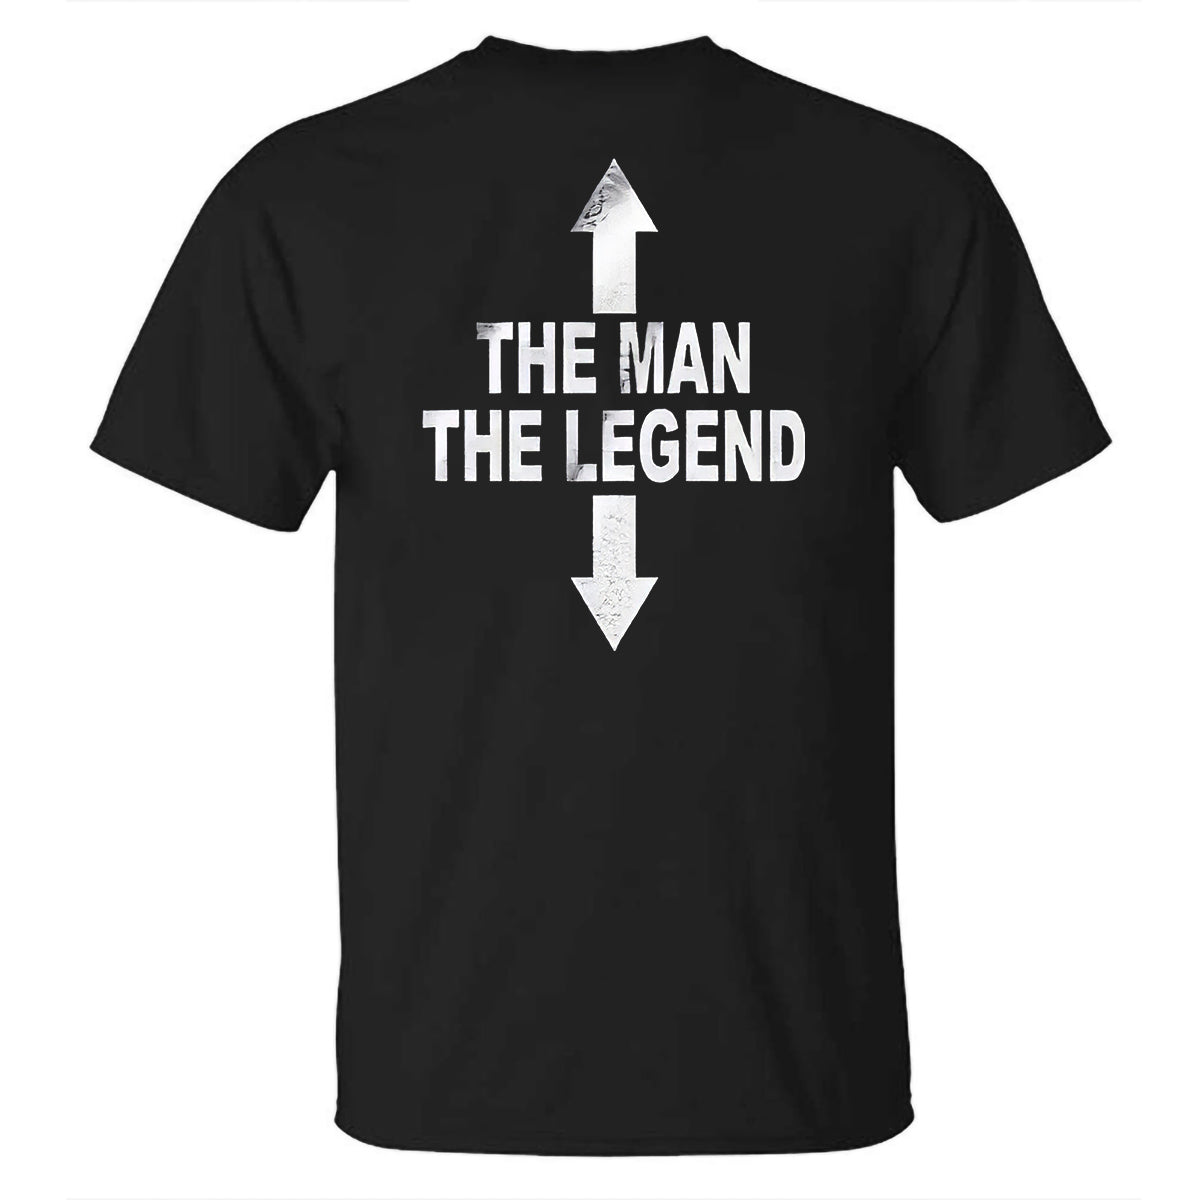 The Man The Legend Printed T-shirt